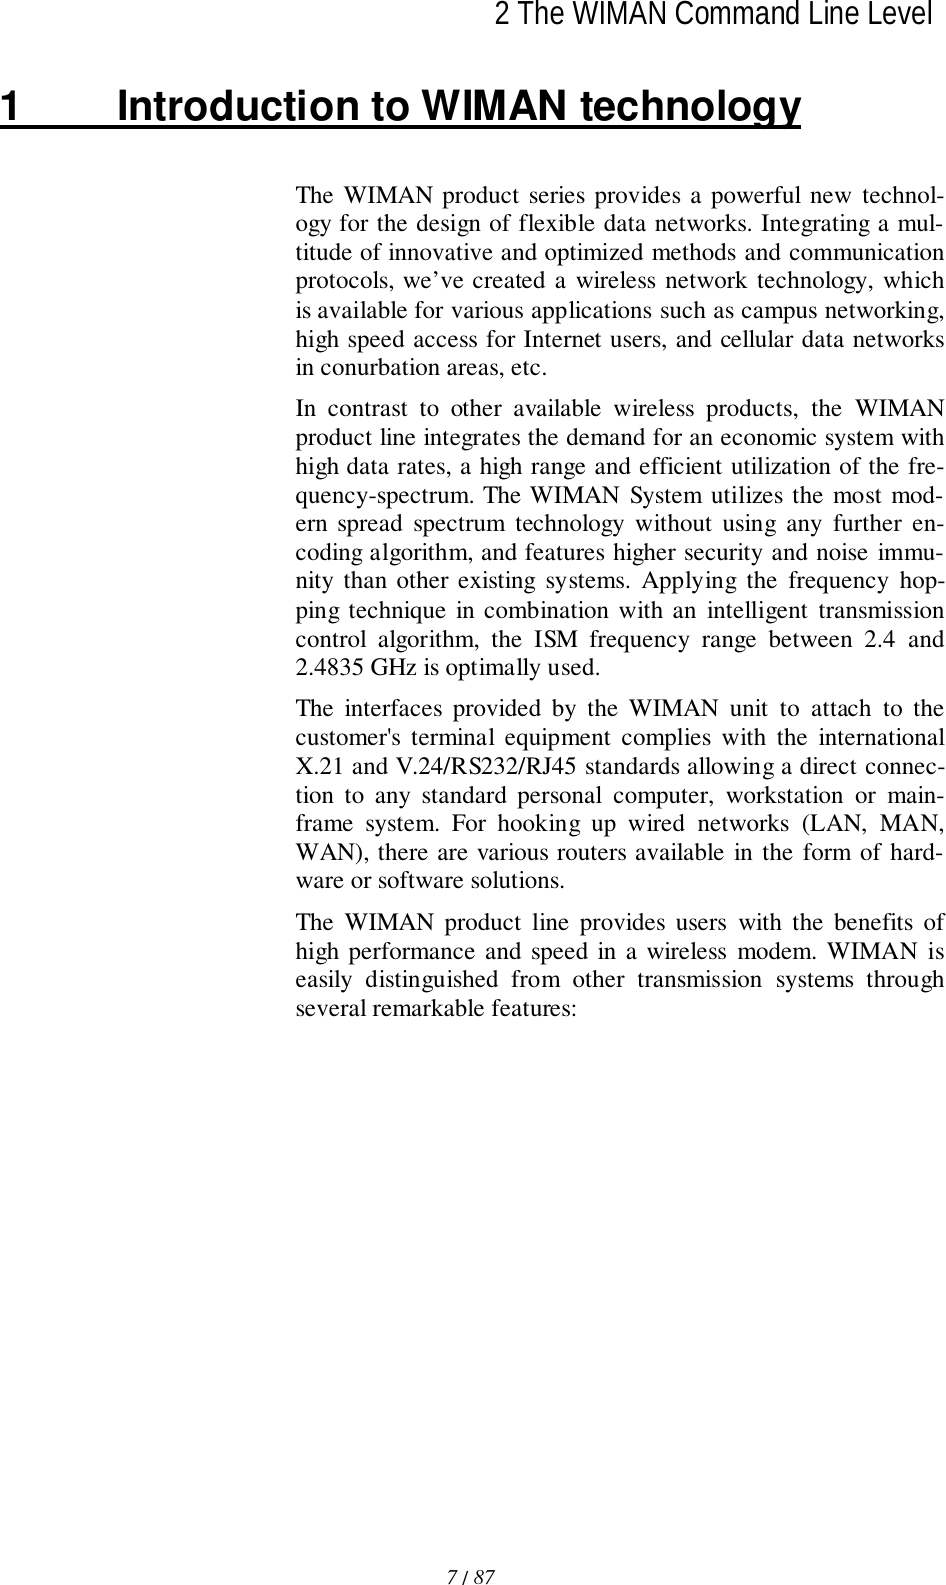 2 The WIMAN Command Line Level7 / 87l1  Introduction to WIMAN technologyThe WIMAN product series provides a powerful new technol-ogy for the design of flexible data networks. Integrating a mul-titude of innovative and optimized methods and communicationprotocols, we’ve created a wireless network technology, whichis available for various applications such as campus networking,high speed access for Internet users, and cellular data networksin conurbation areas, etc.In contrast to other available wireless products, the WIMANproduct line integrates the demand for an economic system withhigh data rates, a high range and efficient utilization of the fre-quency-spectrum. The WIMAN System utilizes the most mod-ern spread spectrum technology without using any further en-coding algorithm, and features higher security and noise immu-nity than other existing systems. Applying the frequency hop-ping technique in combination with an intelligent transmissioncontrol algorithm, the ISM frequency range between 2.4 and2.4835 GHz is optimally used.The interfaces provided by the WIMAN unit to attach to thecustomer&apos;s terminal equipment complies with the internationalX.21 and V.24/RS232/RJ45 standards allowing a direct connec-tion to any standard personal computer, workstation or main-frame system. For hooking up wired networks (LAN, MAN,WAN), there are various routers available in the form of hard-ware or software solutions.The WIMAN product line provides users with the benefits ofhigh performance and speed in a wireless modem. WIMAN iseasily distinguished from other transmission systems throughseveral remarkable features: